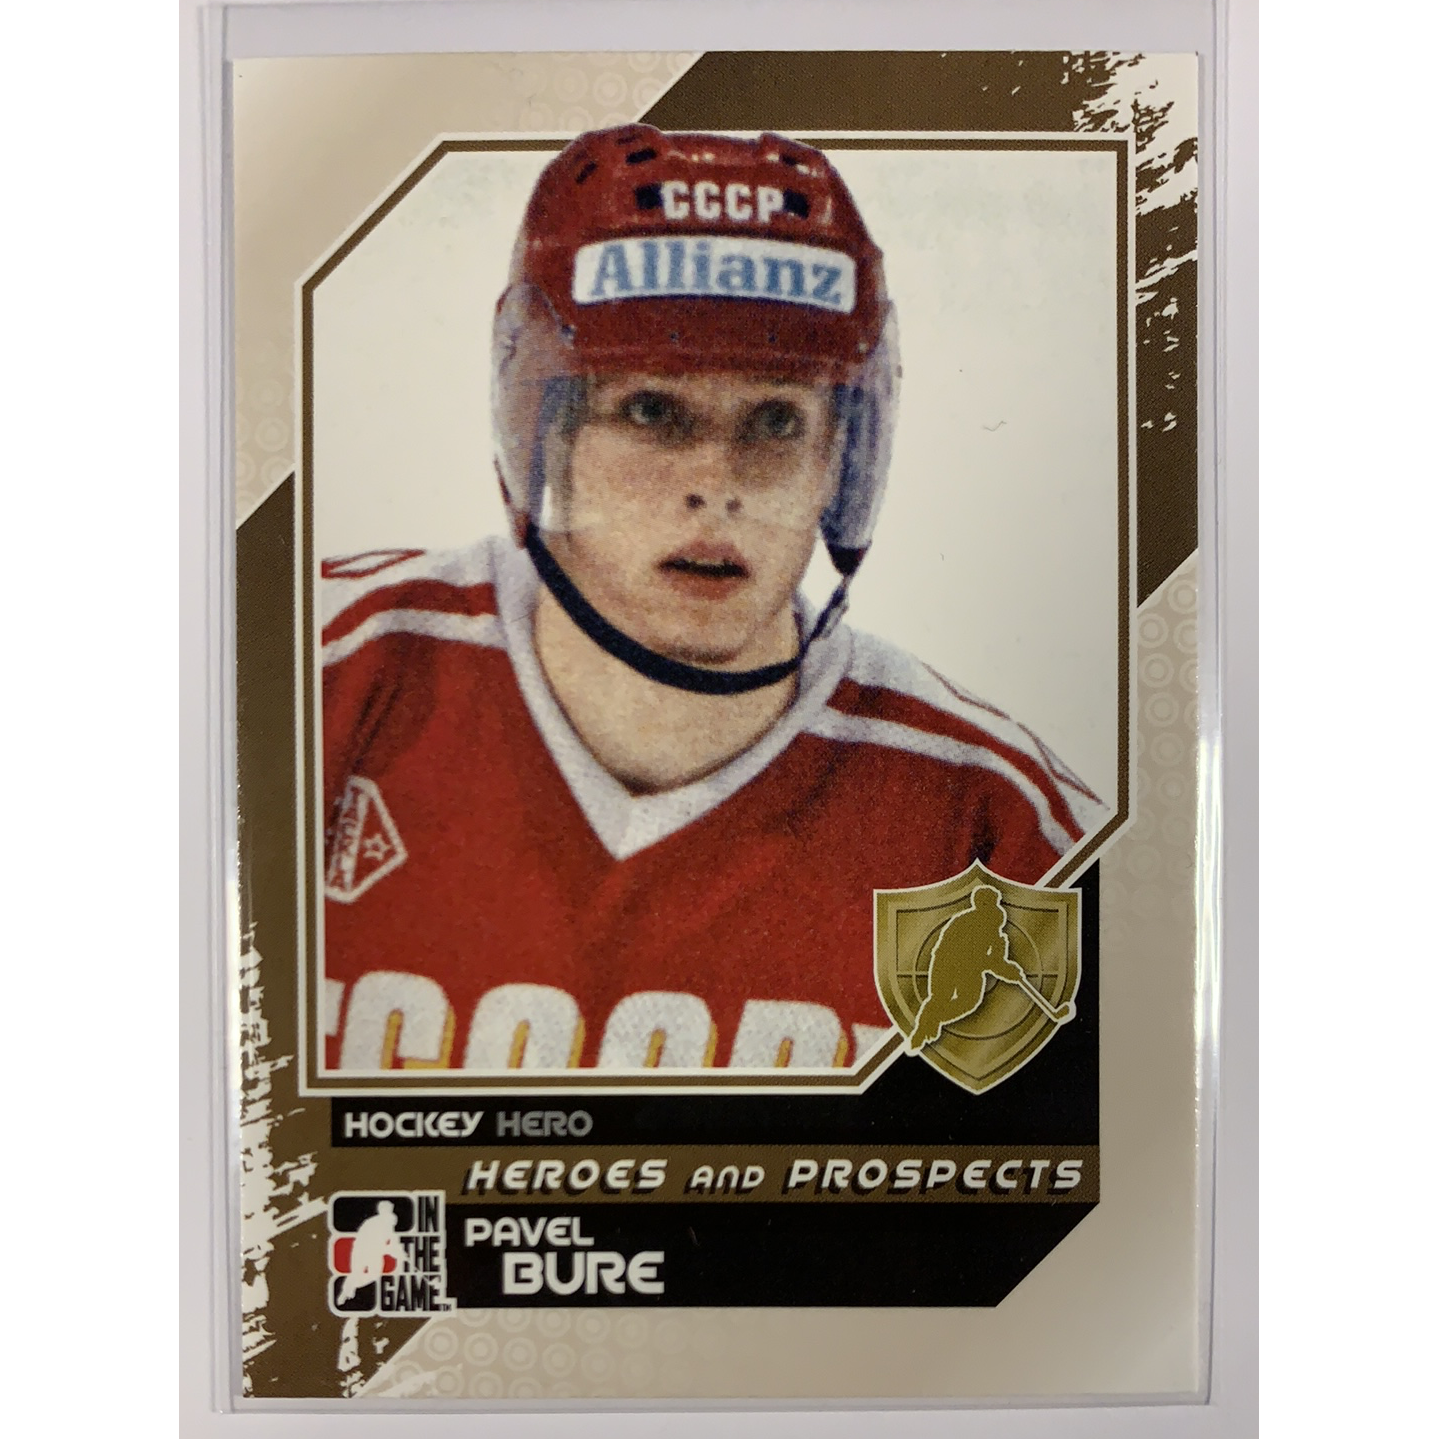  2011 In the Game Pavel Bure Heroes and Prospects  Local Legends Cards & Collectibles